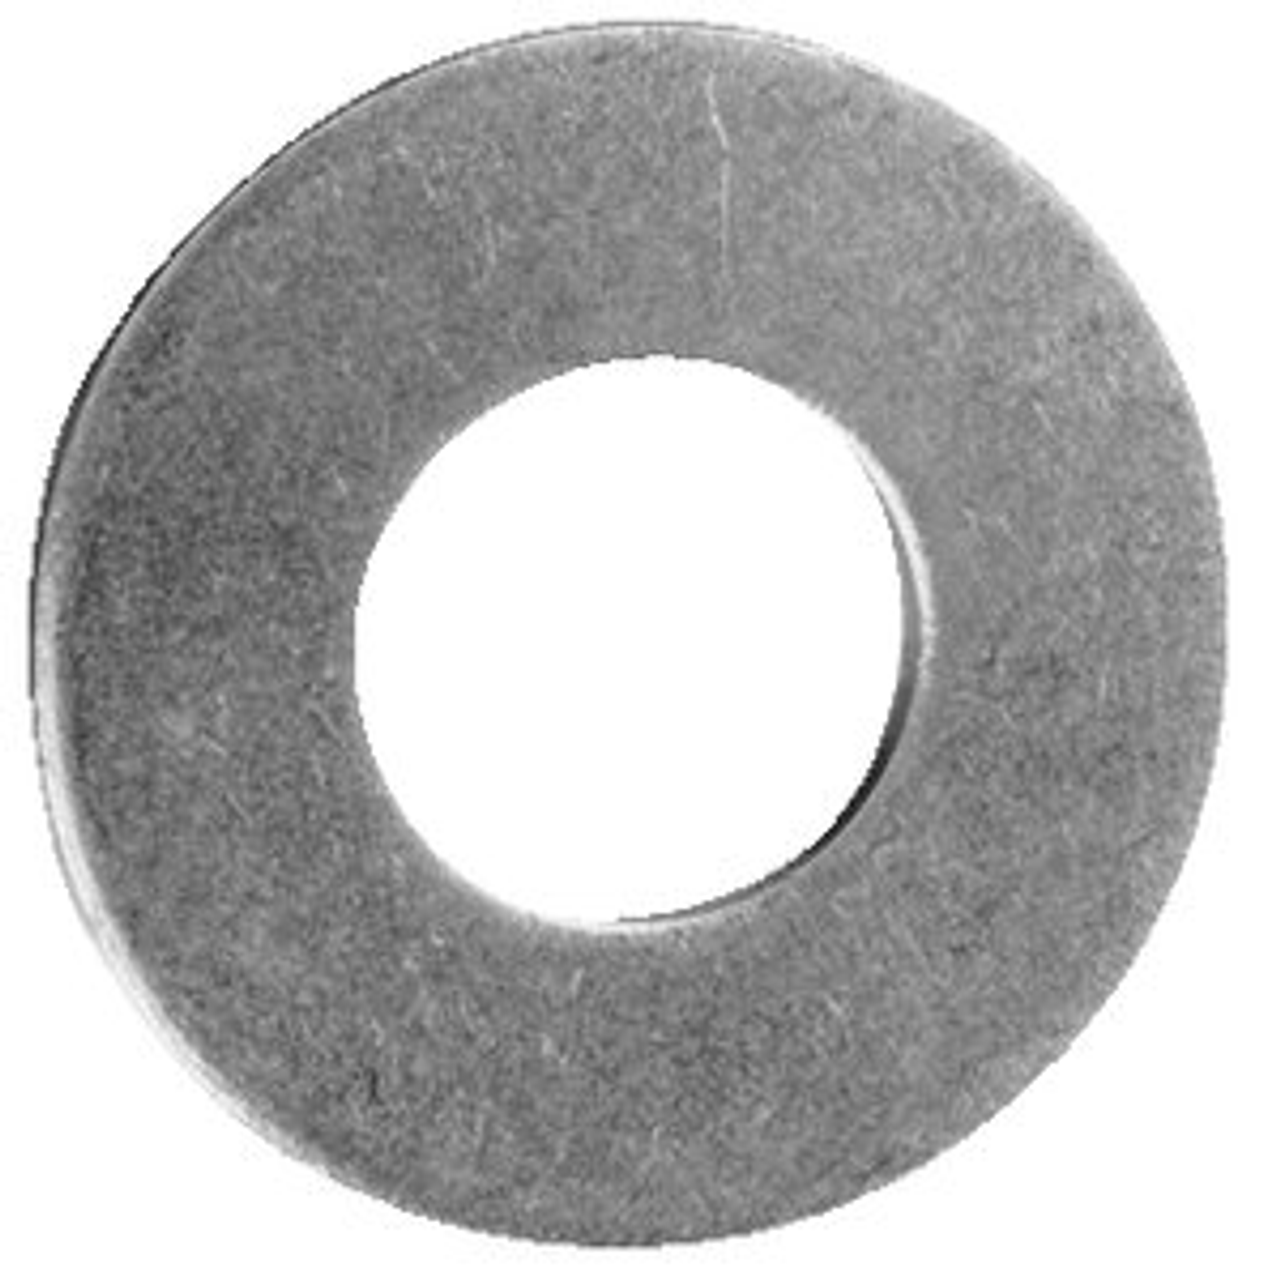 M4 DIN 125A Stainless Steel A2 Flat Washers (5,000/Bulk Pkg.)